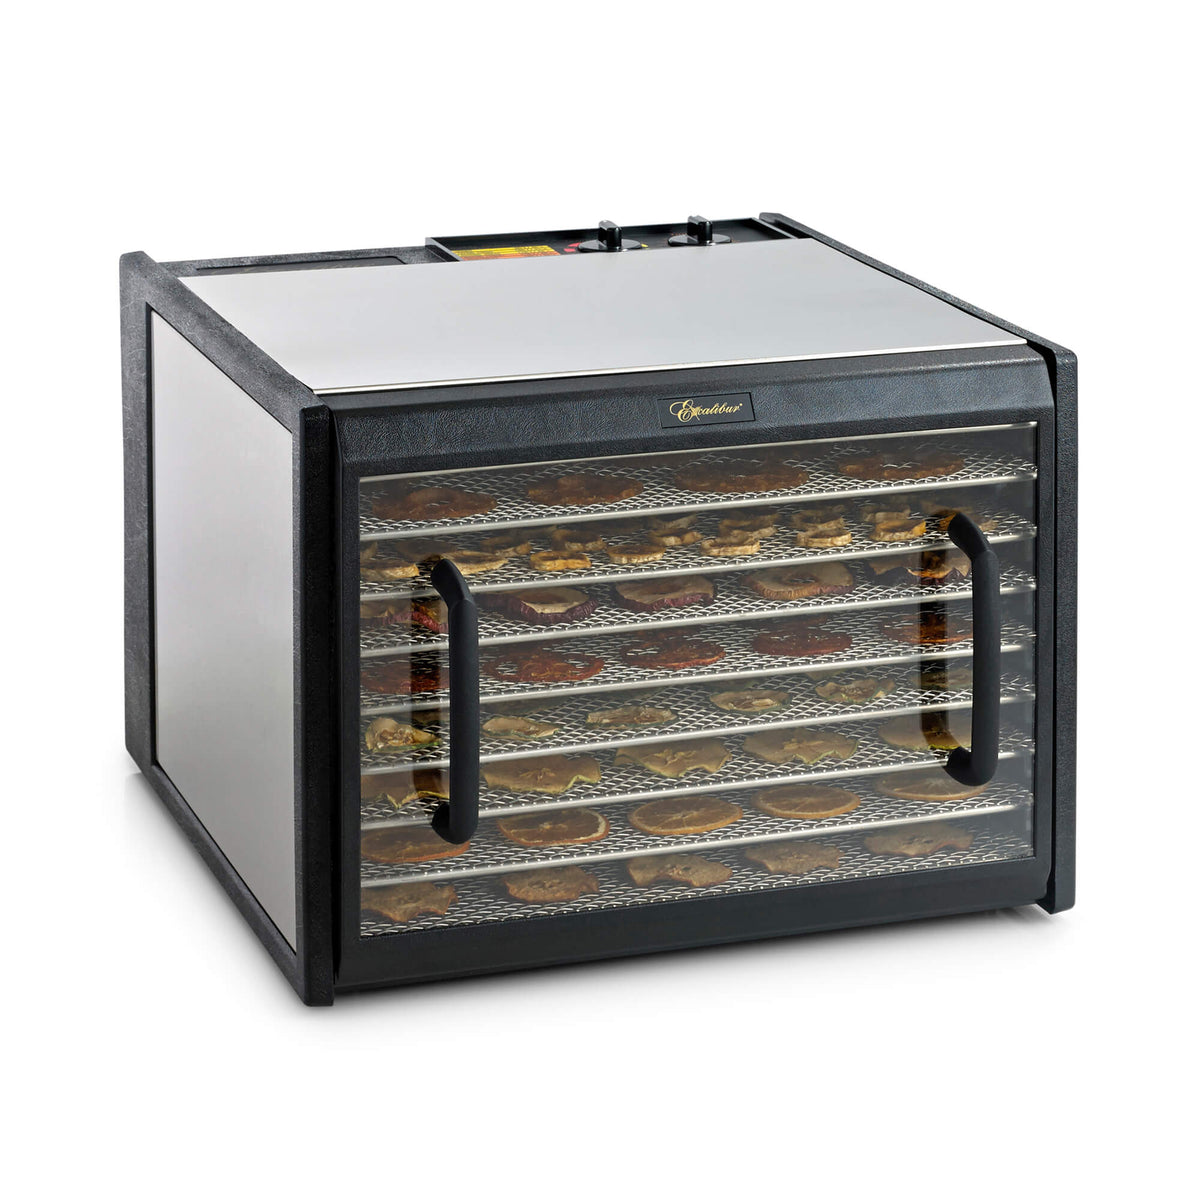 Excalibur D902CDSHD 9 tray stainless steel dehydrator with clear door closed and food on the trays.